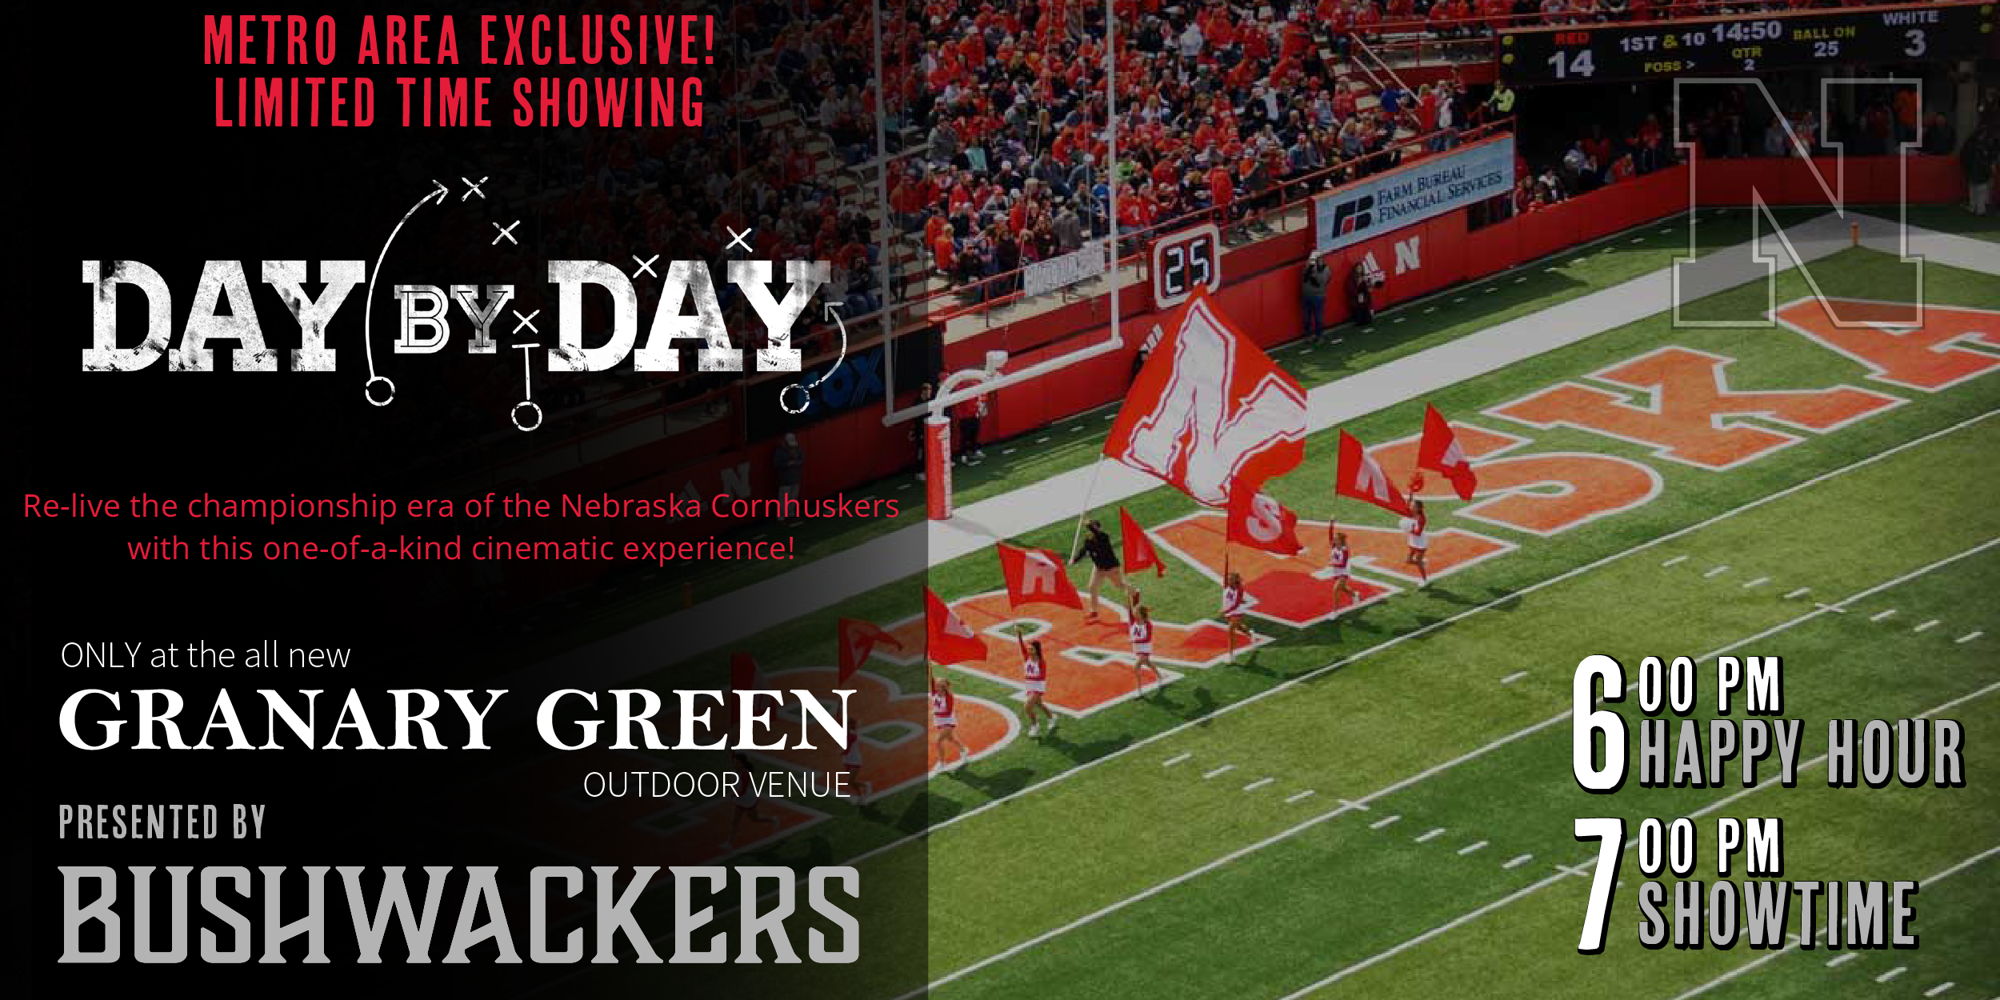 Week 7 of 8: Friday Night Football Film - Showing of "Day by Day" Husker Documentary (Part 1) promotional image